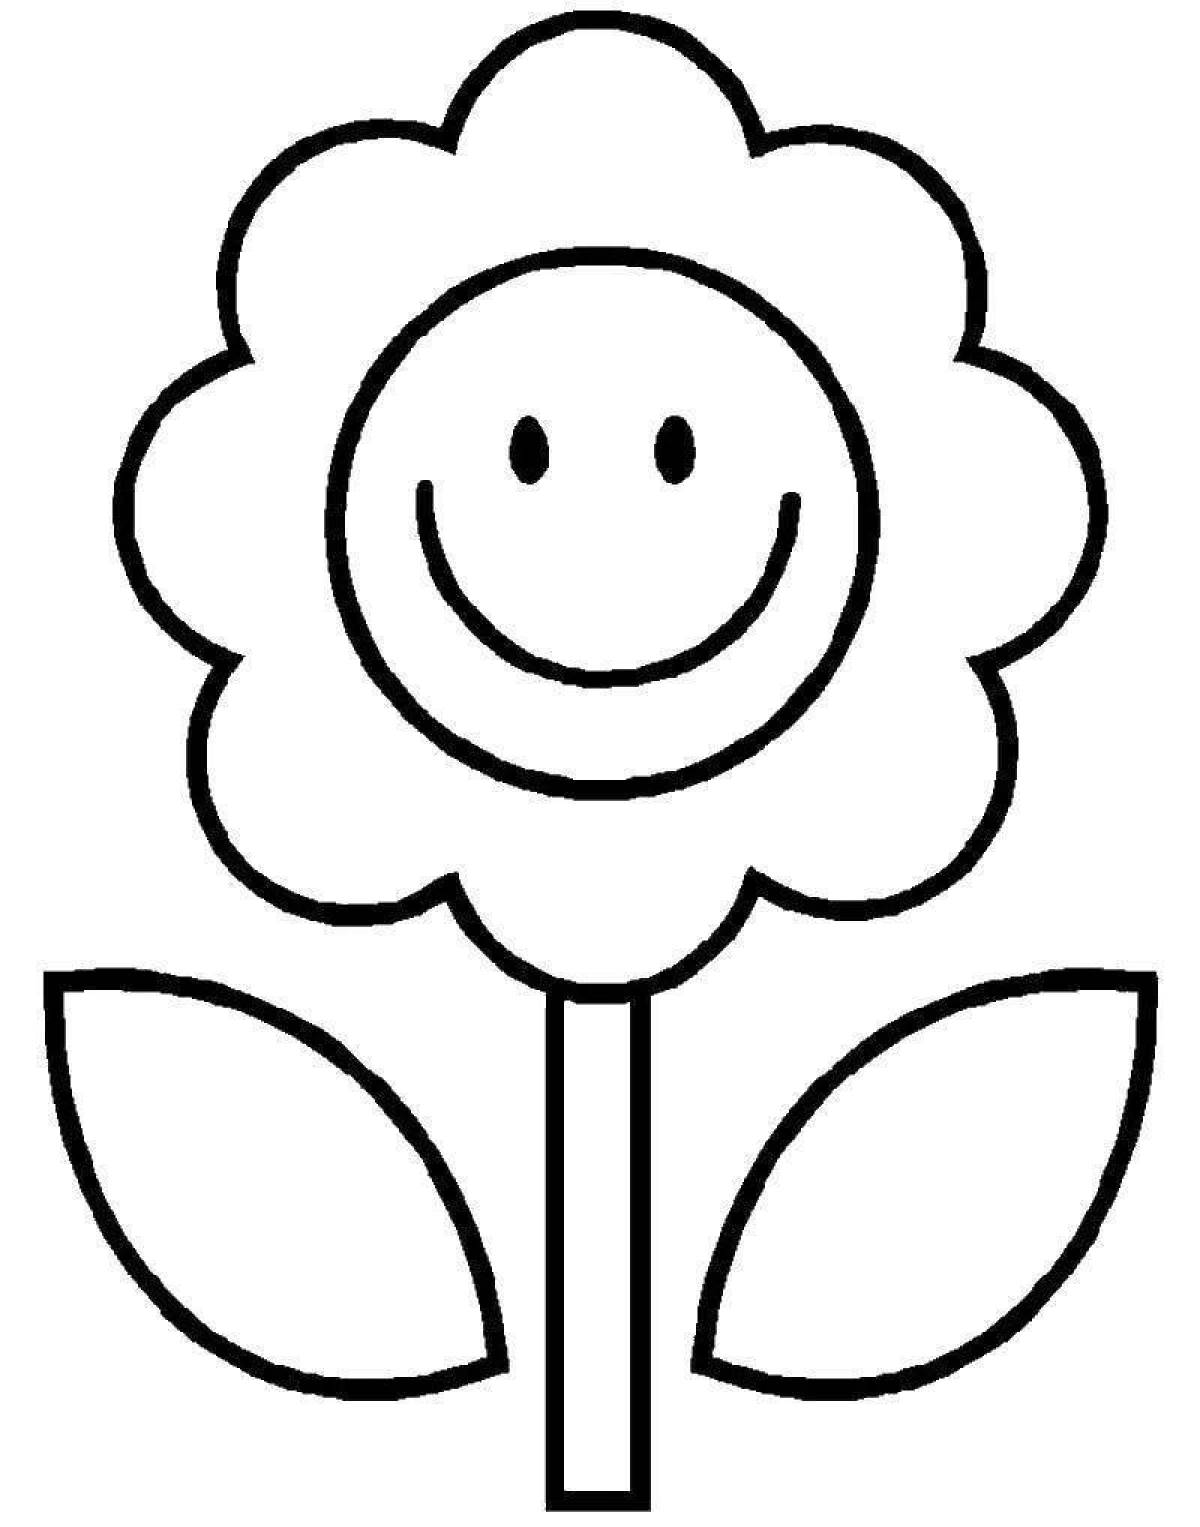 Great flower coloring book for 5-6 year olds